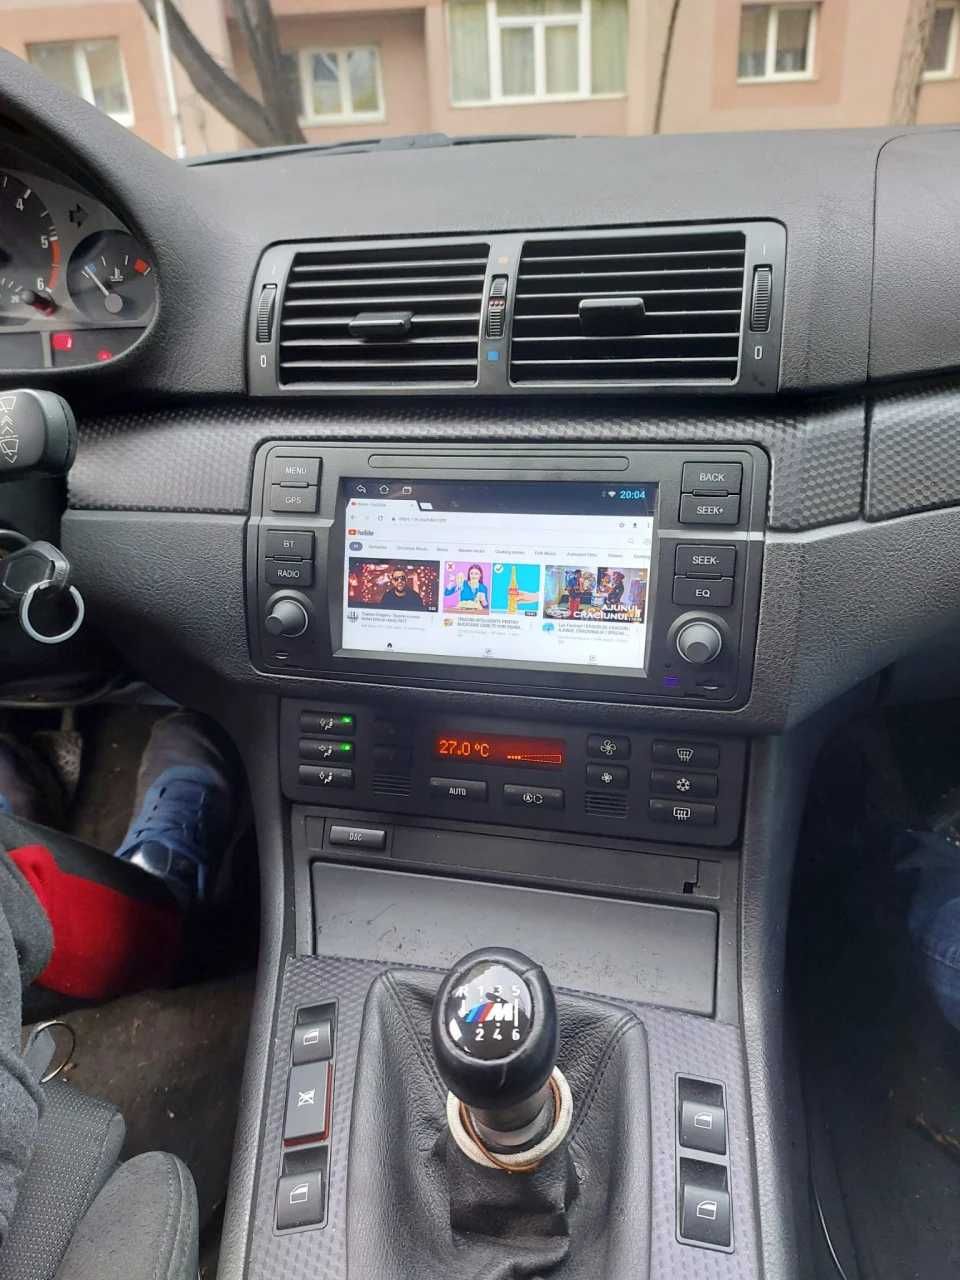 Navigatie GPS Android BMW E46 Rover 75 Wi-Fi Bluetooth DSP USB